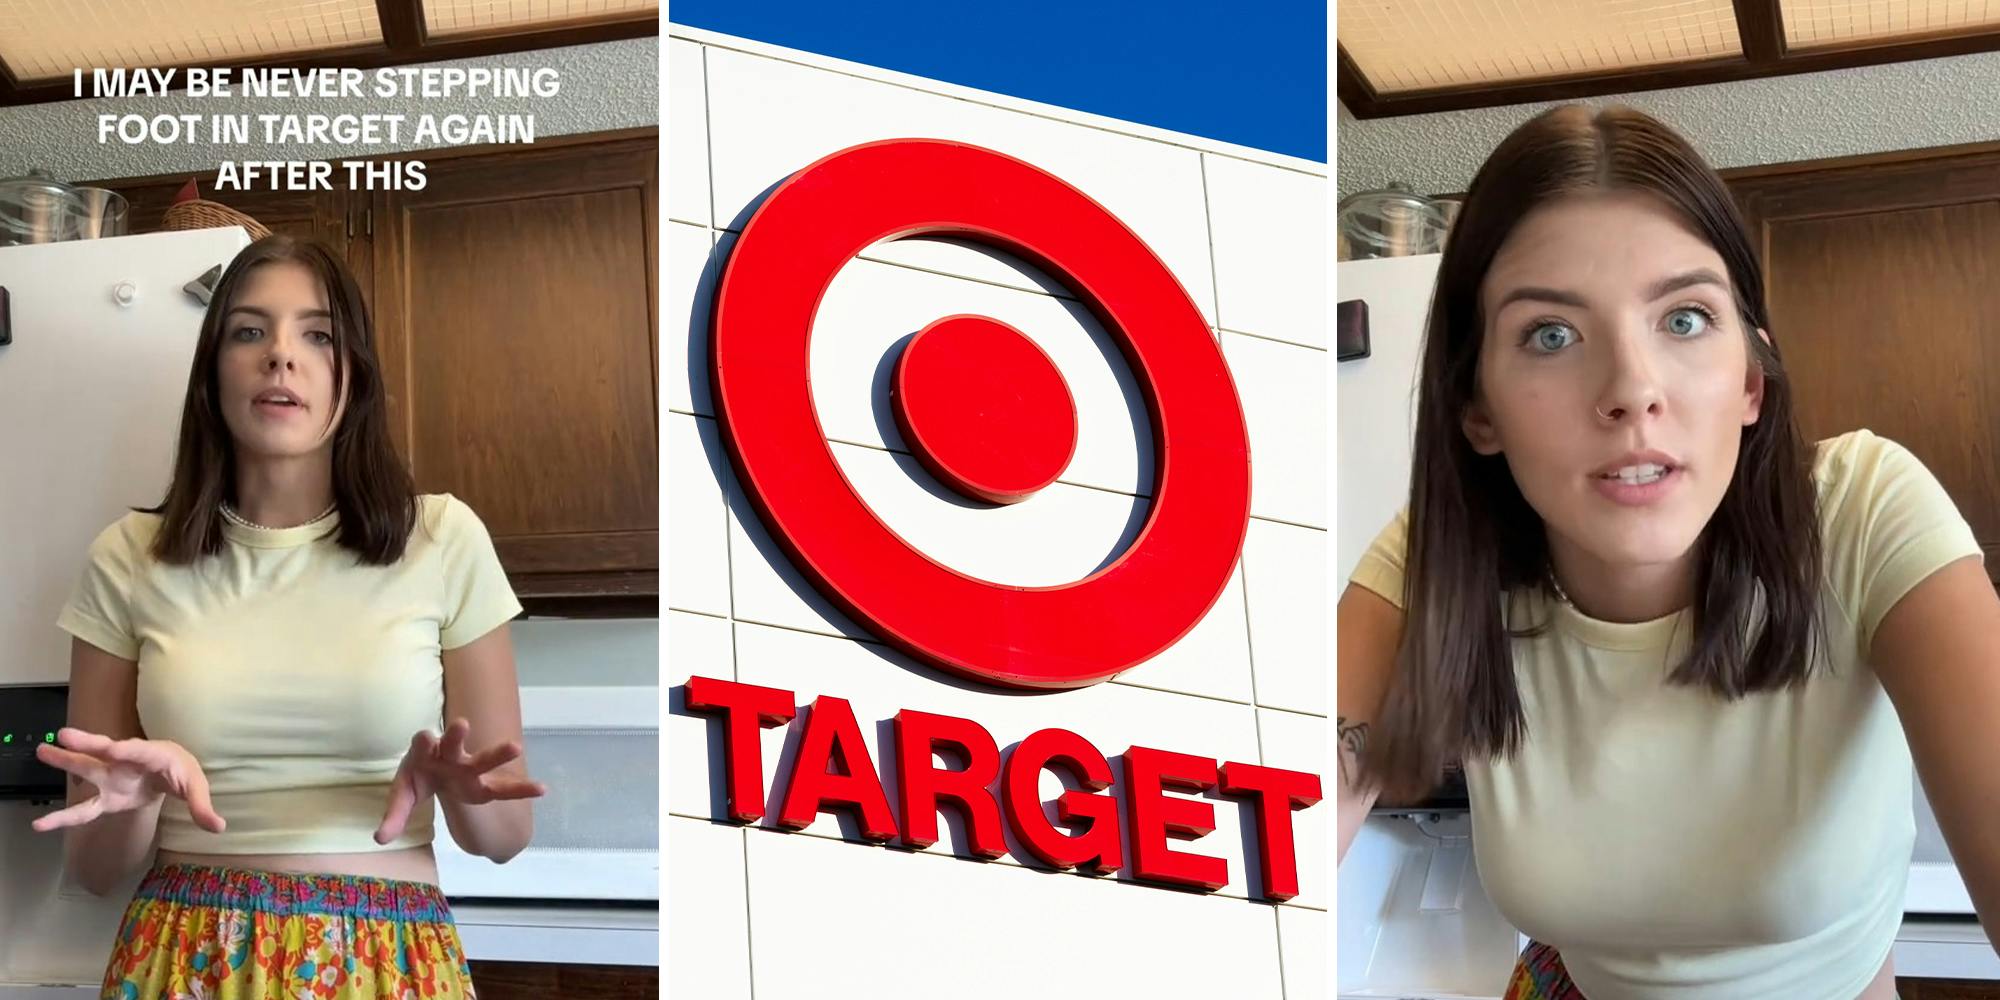 Mom slams Target for how it’s marketing its baby wipes